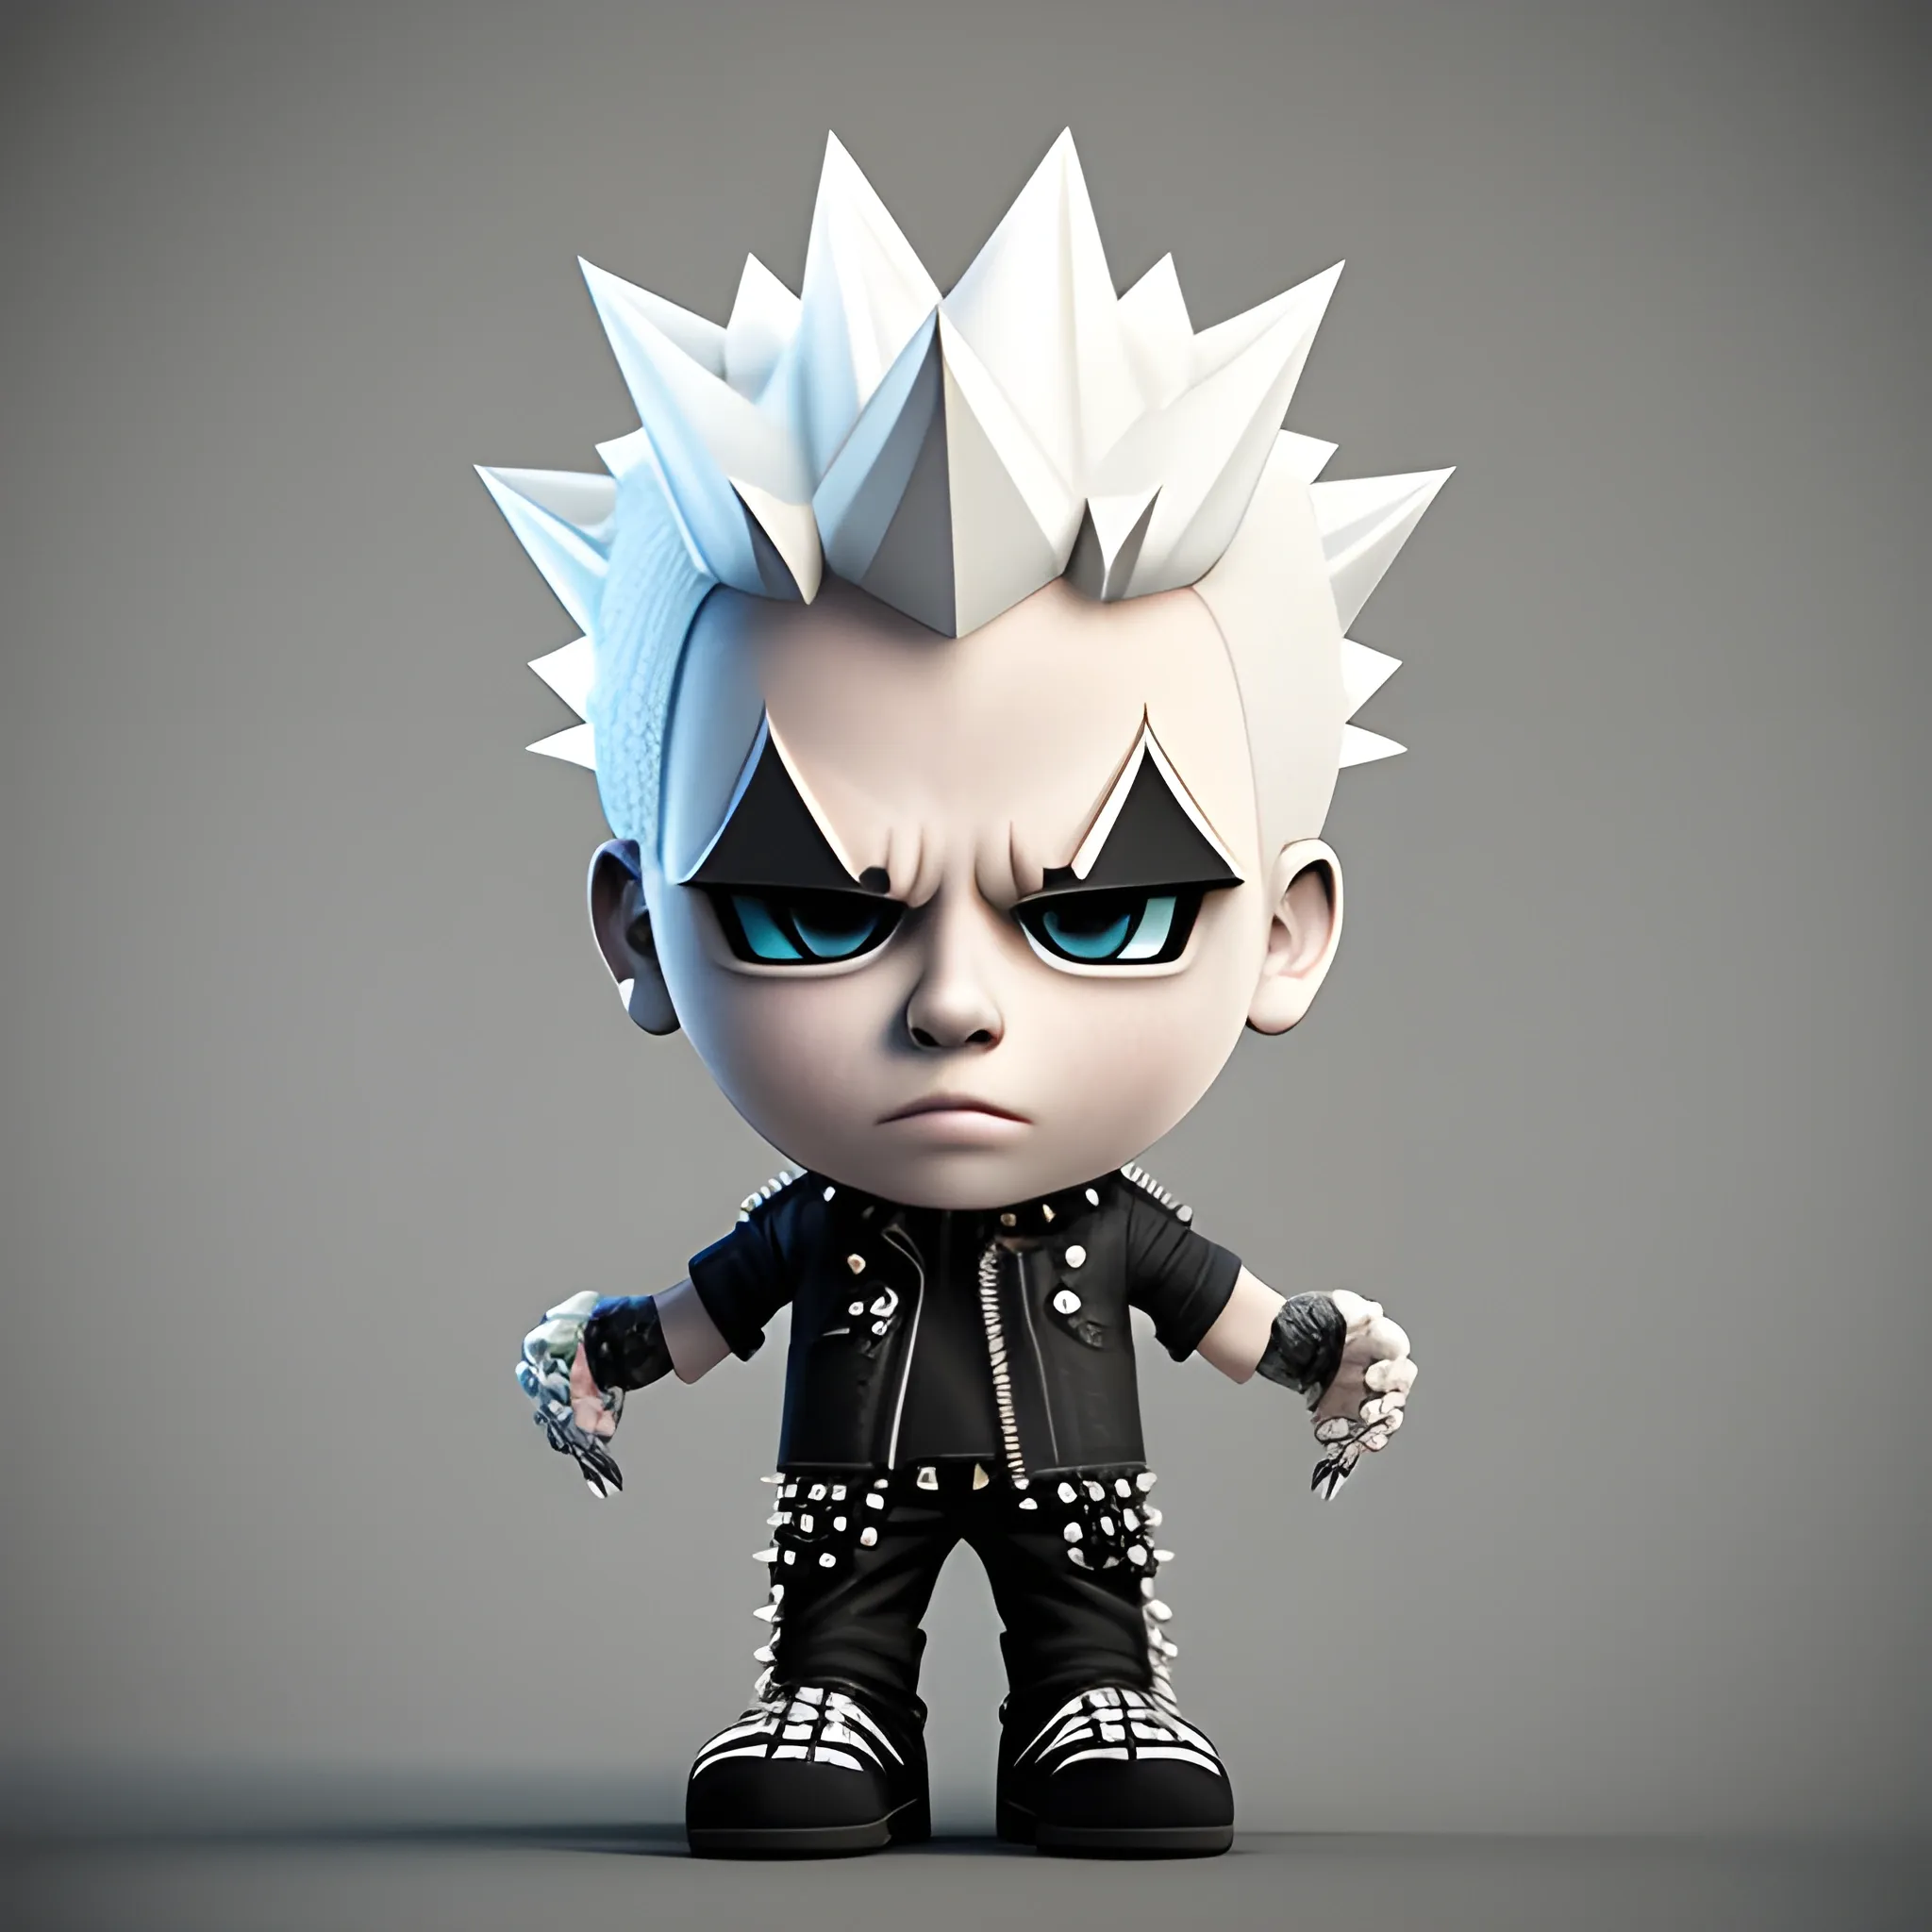 White Punk Character With Spikey Head Mascot, 3D